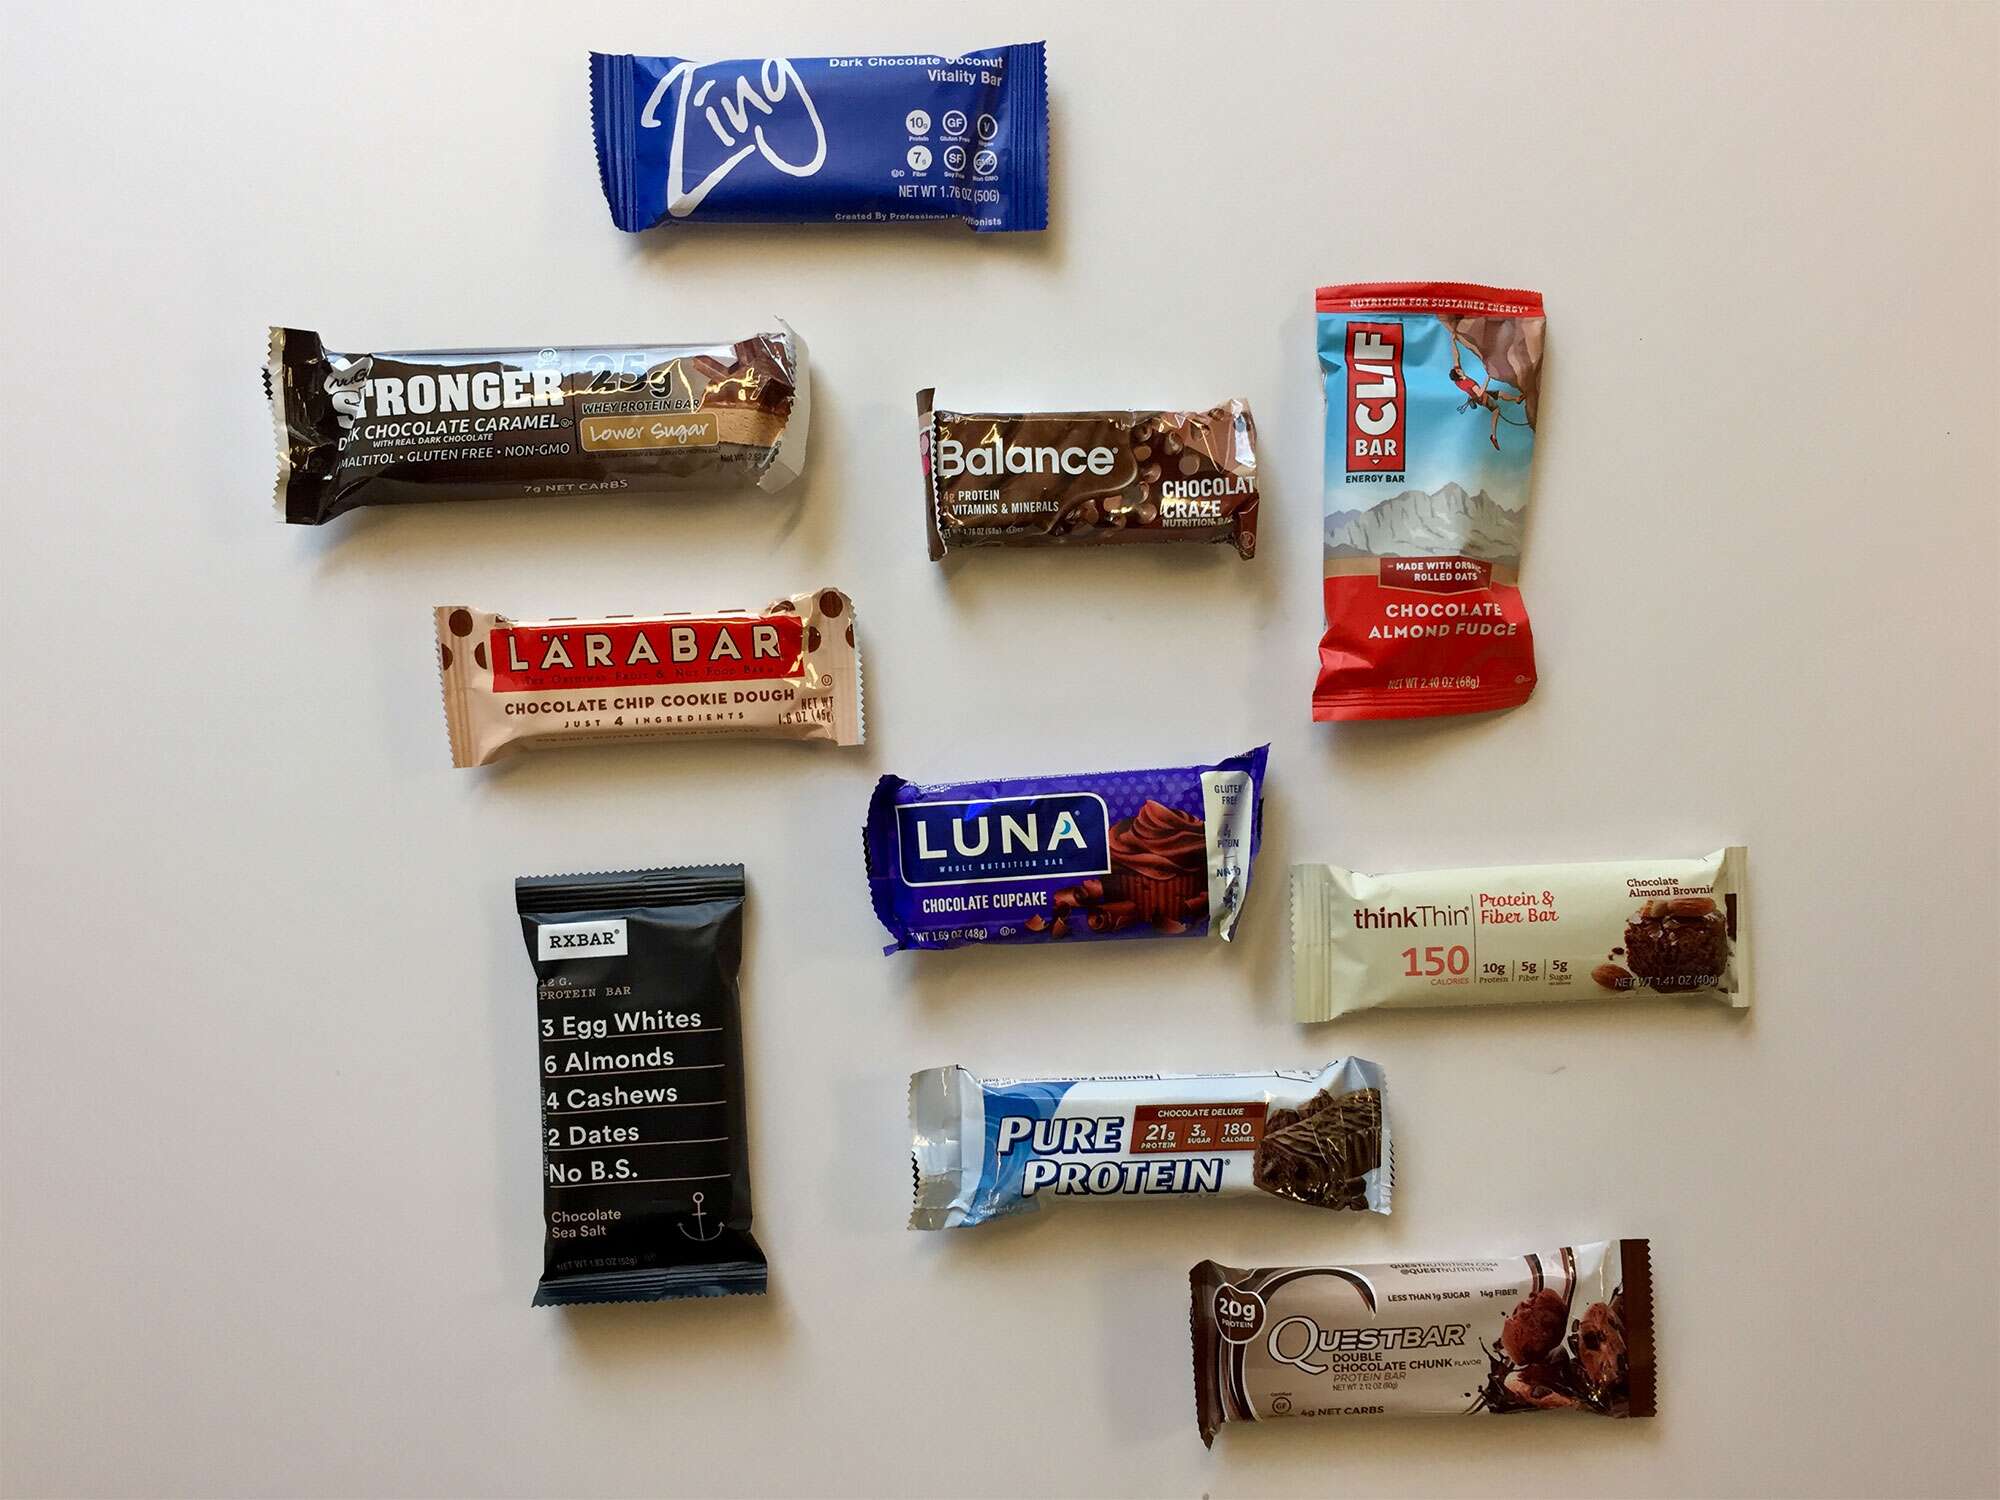 We Tried 10 Protein Bars And This One Was The Least Gross | Myrecipes